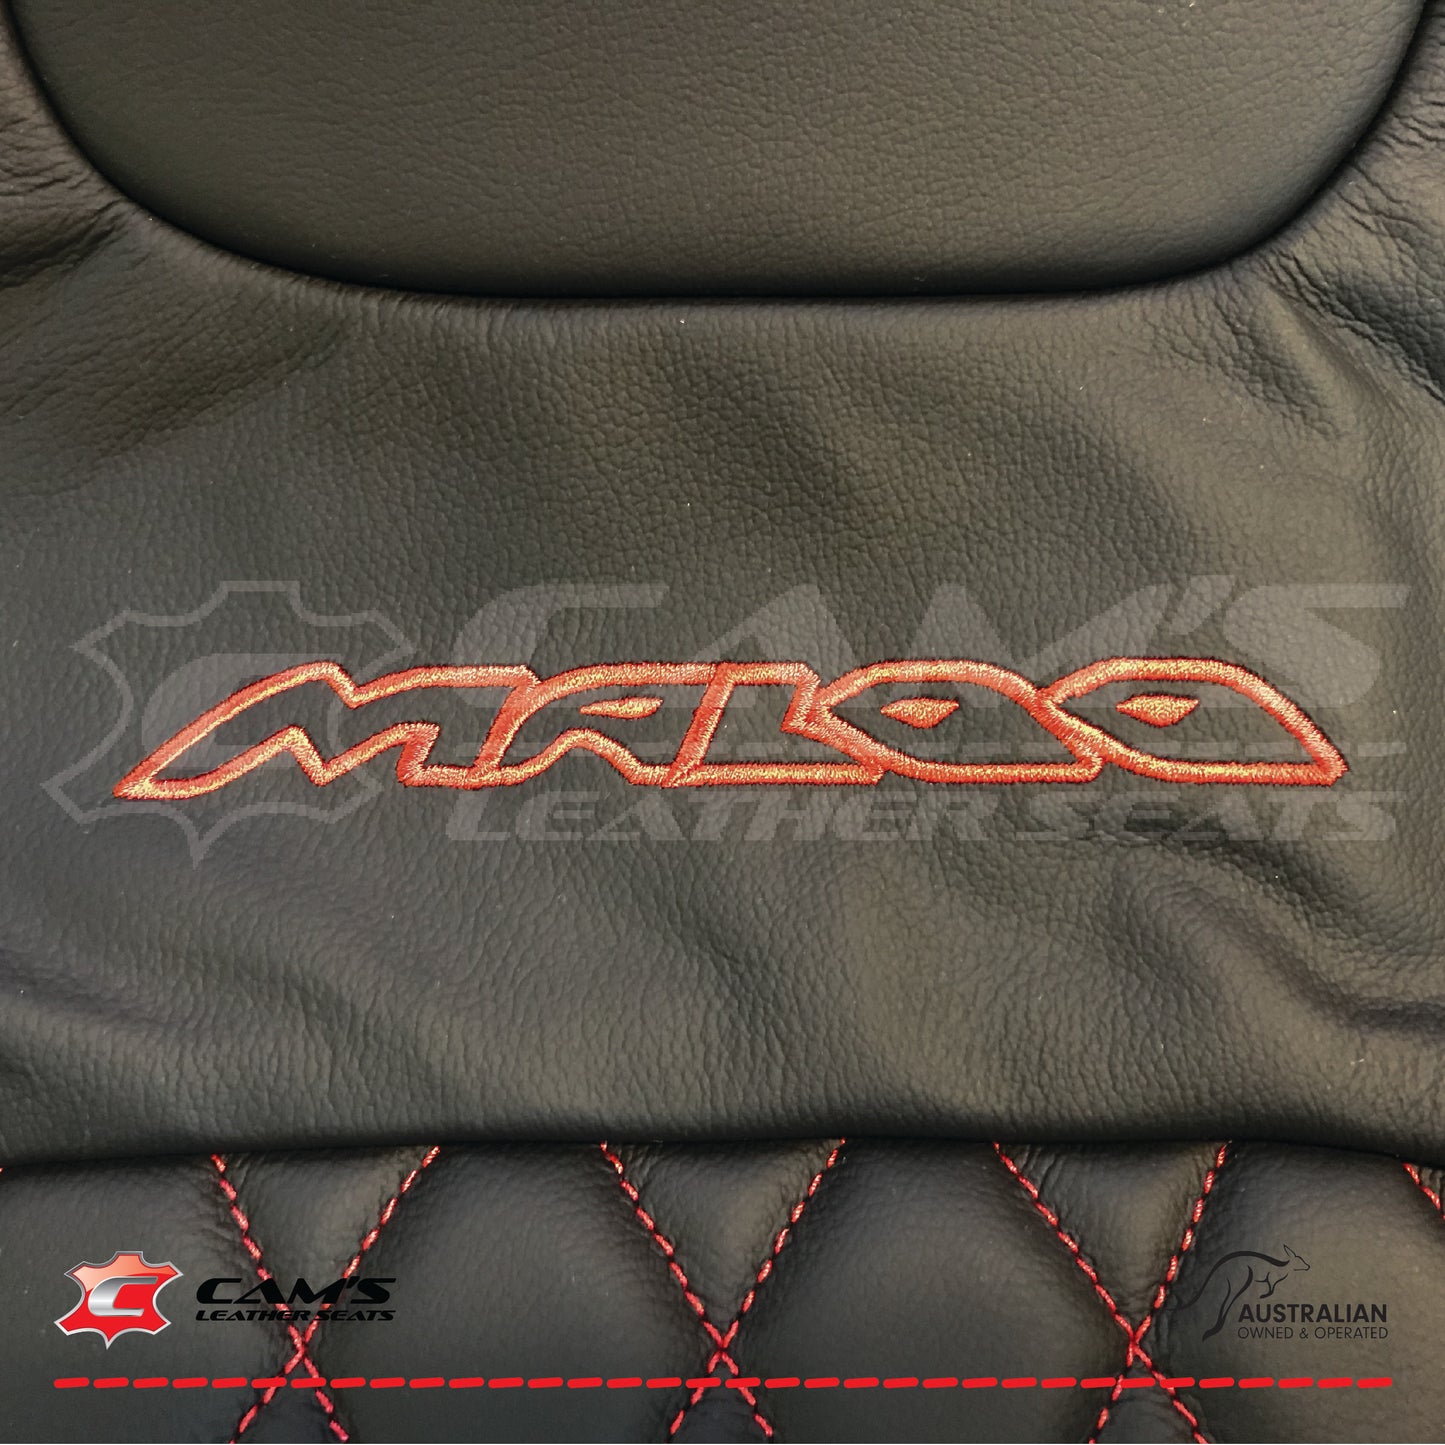 LEATHER SEATS TRIM KIT FOR HOLDEN HSV VE MALOO UTE ONYX WITH RED DIAMOND STITCH